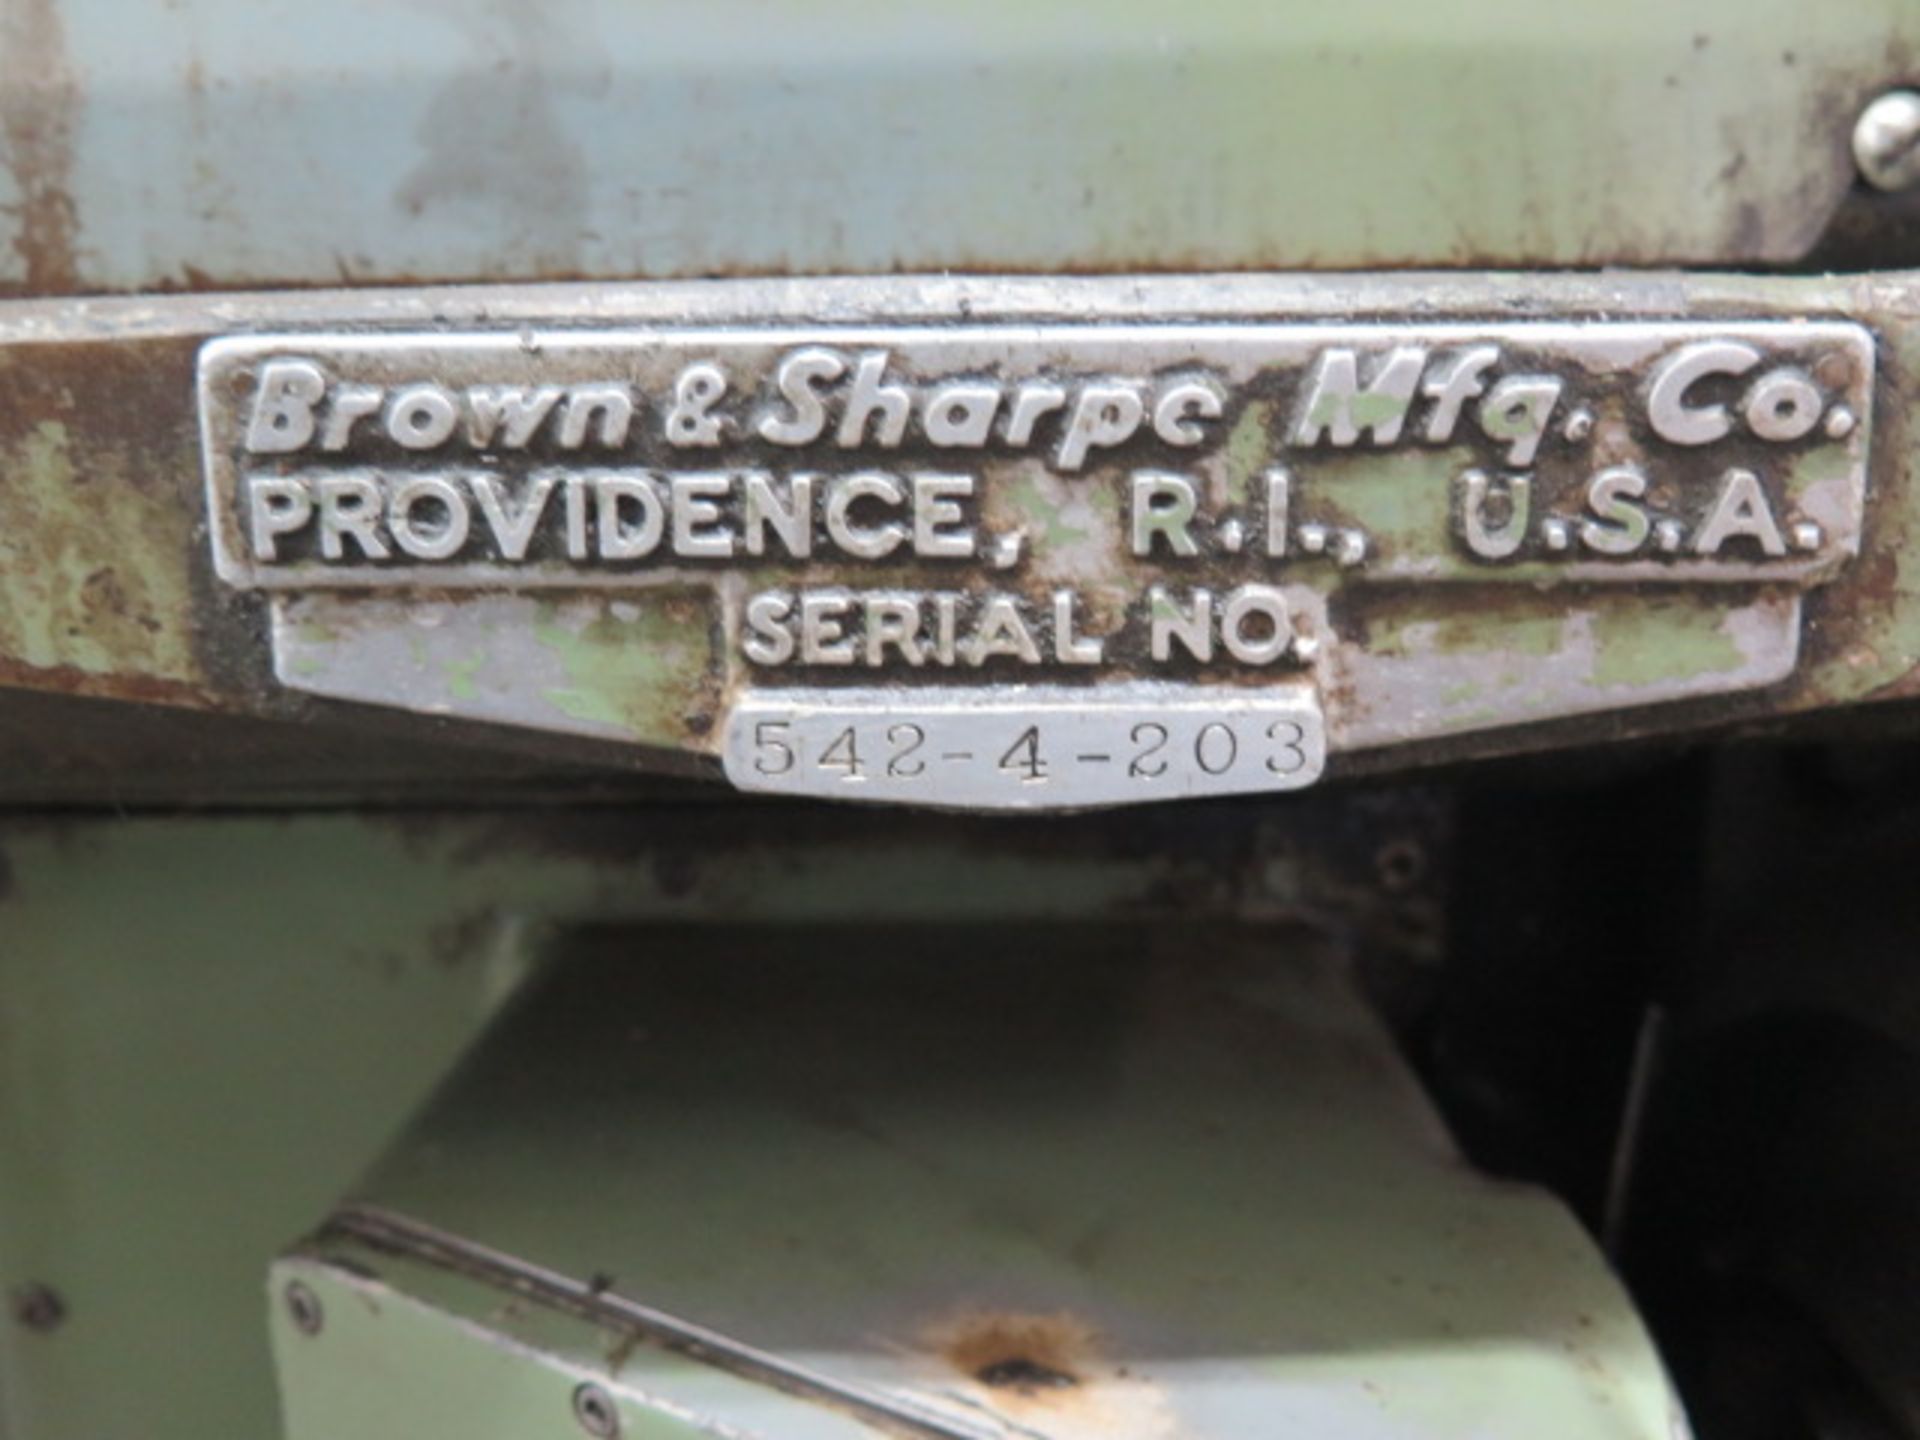 Brown & Sharpe No. 4 Automatic Screw Machine w/ 3-Cross Slides, Rotary Style Turret, Bar Feed, - Image 14 of 14